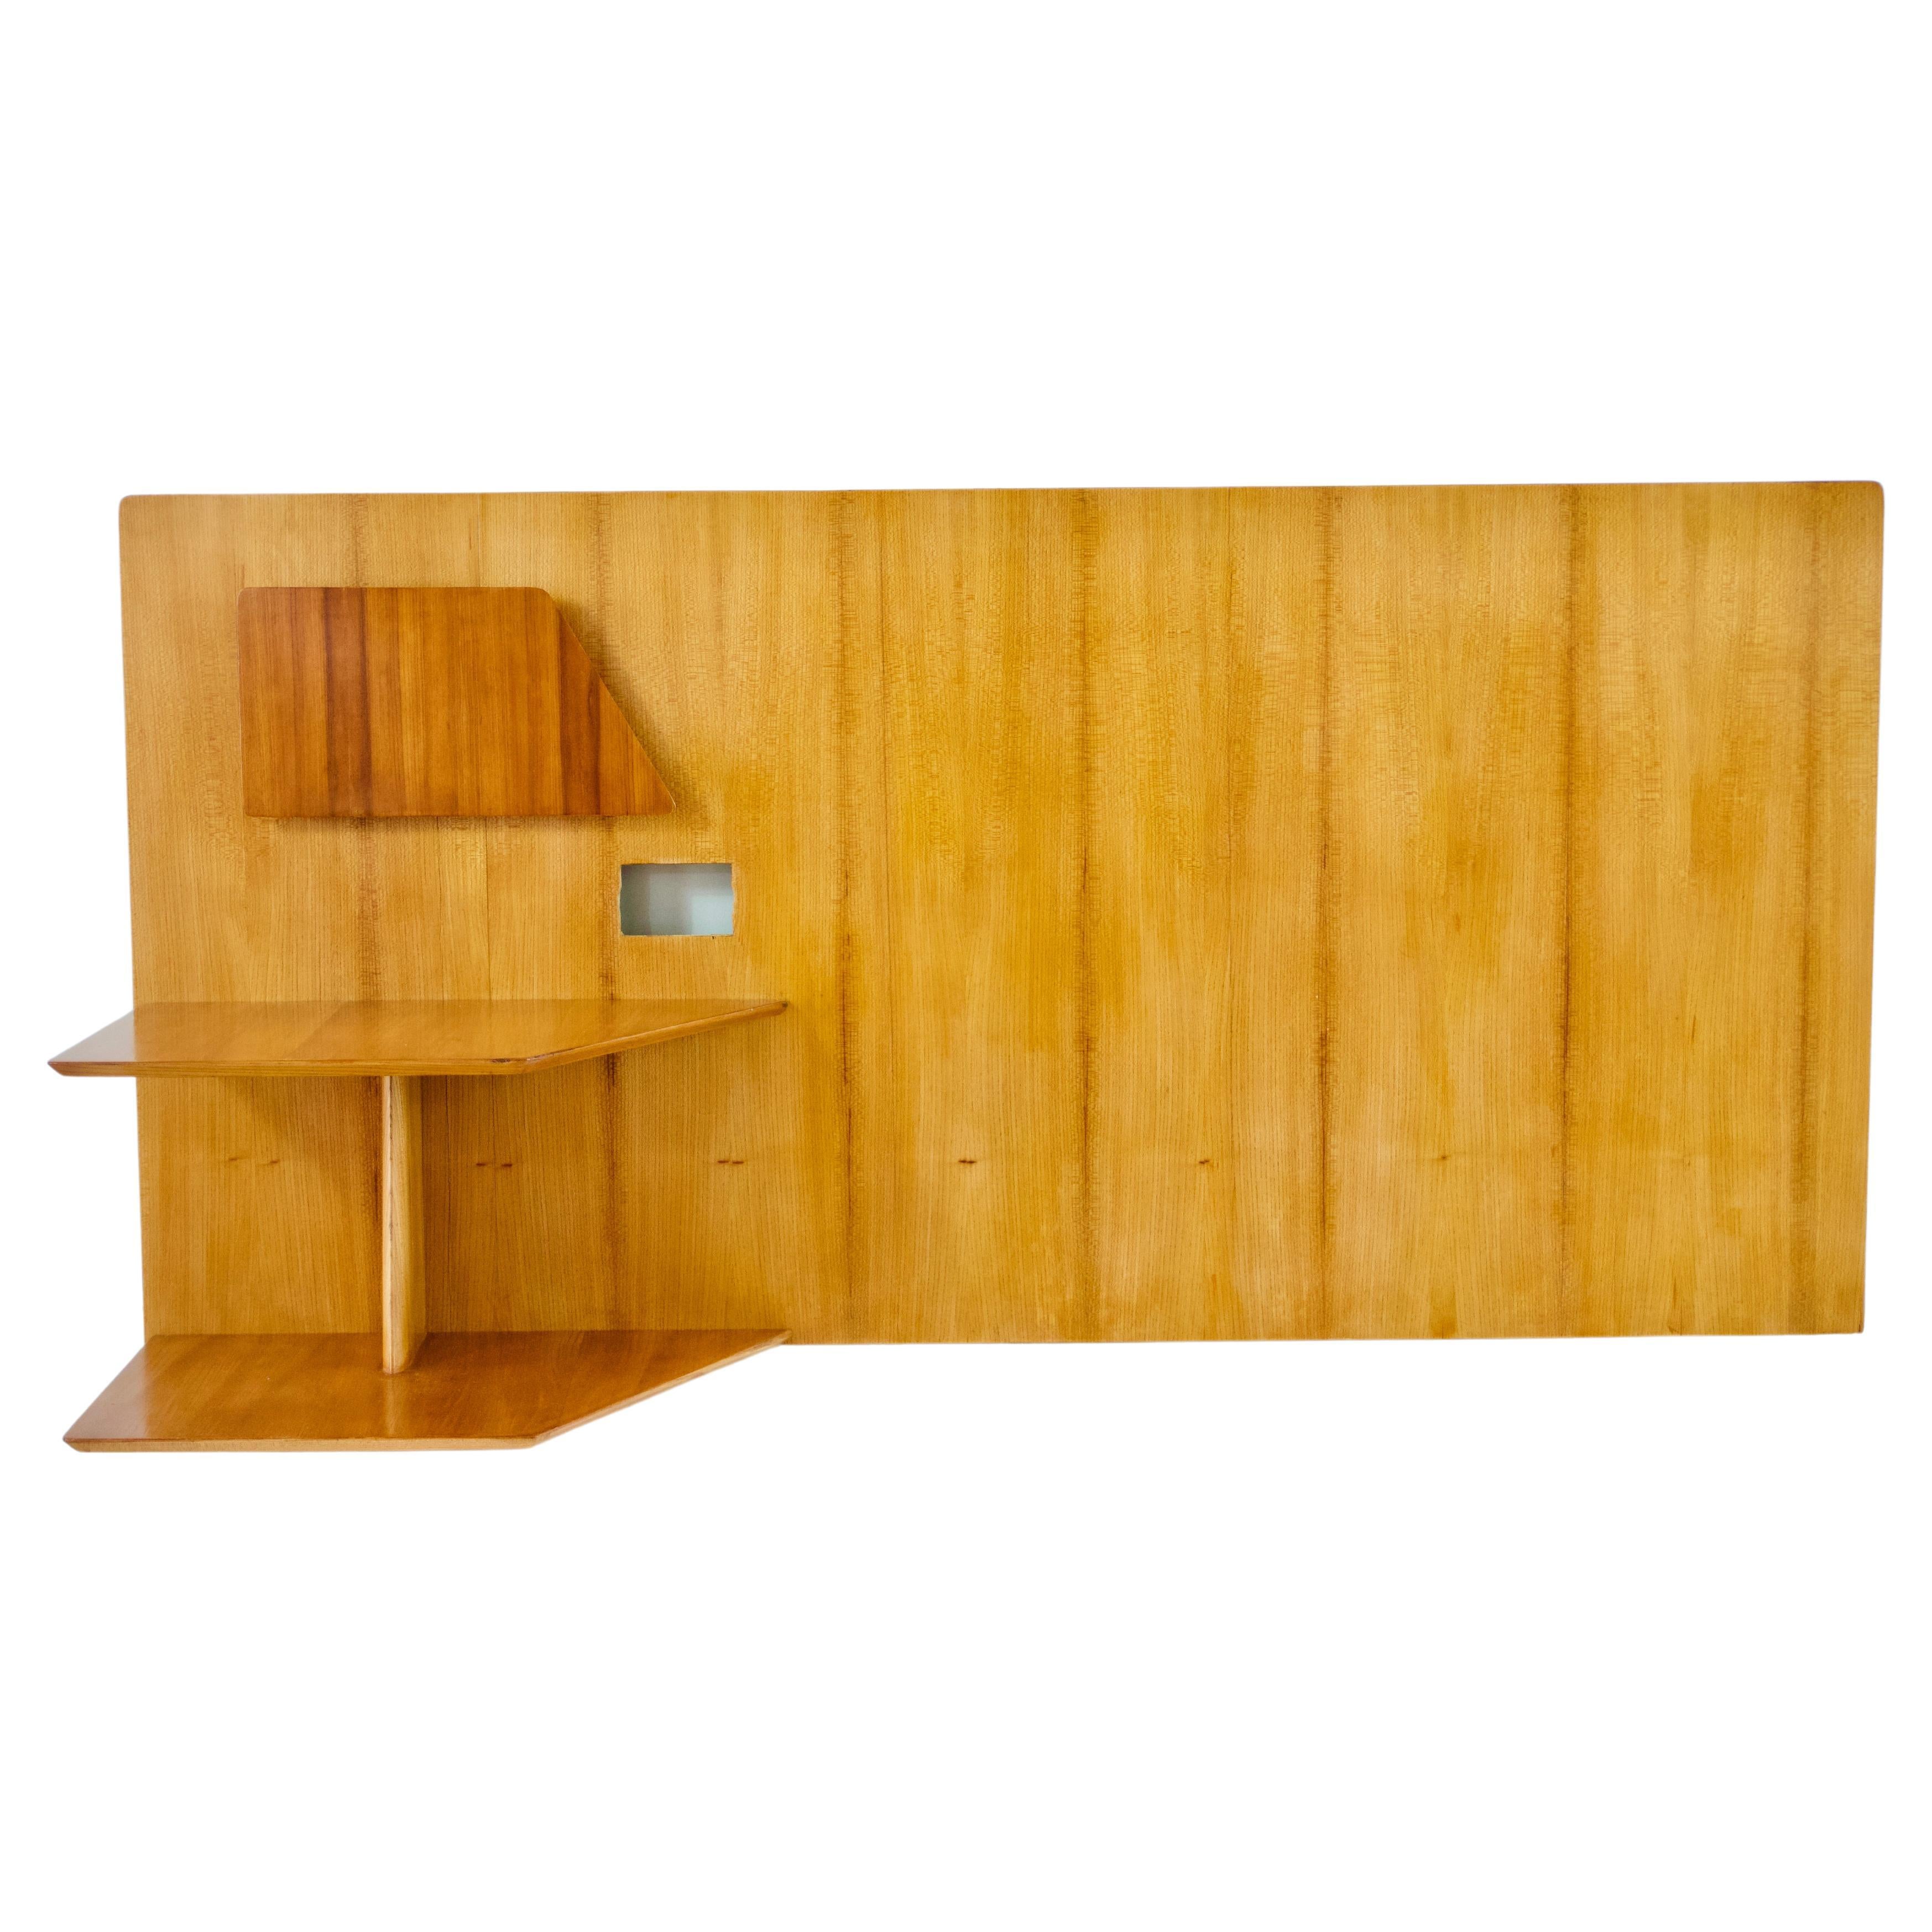 Gio Ponti Single Elm Left Headboard with fitted bedside table, Hotel Royal, 1955